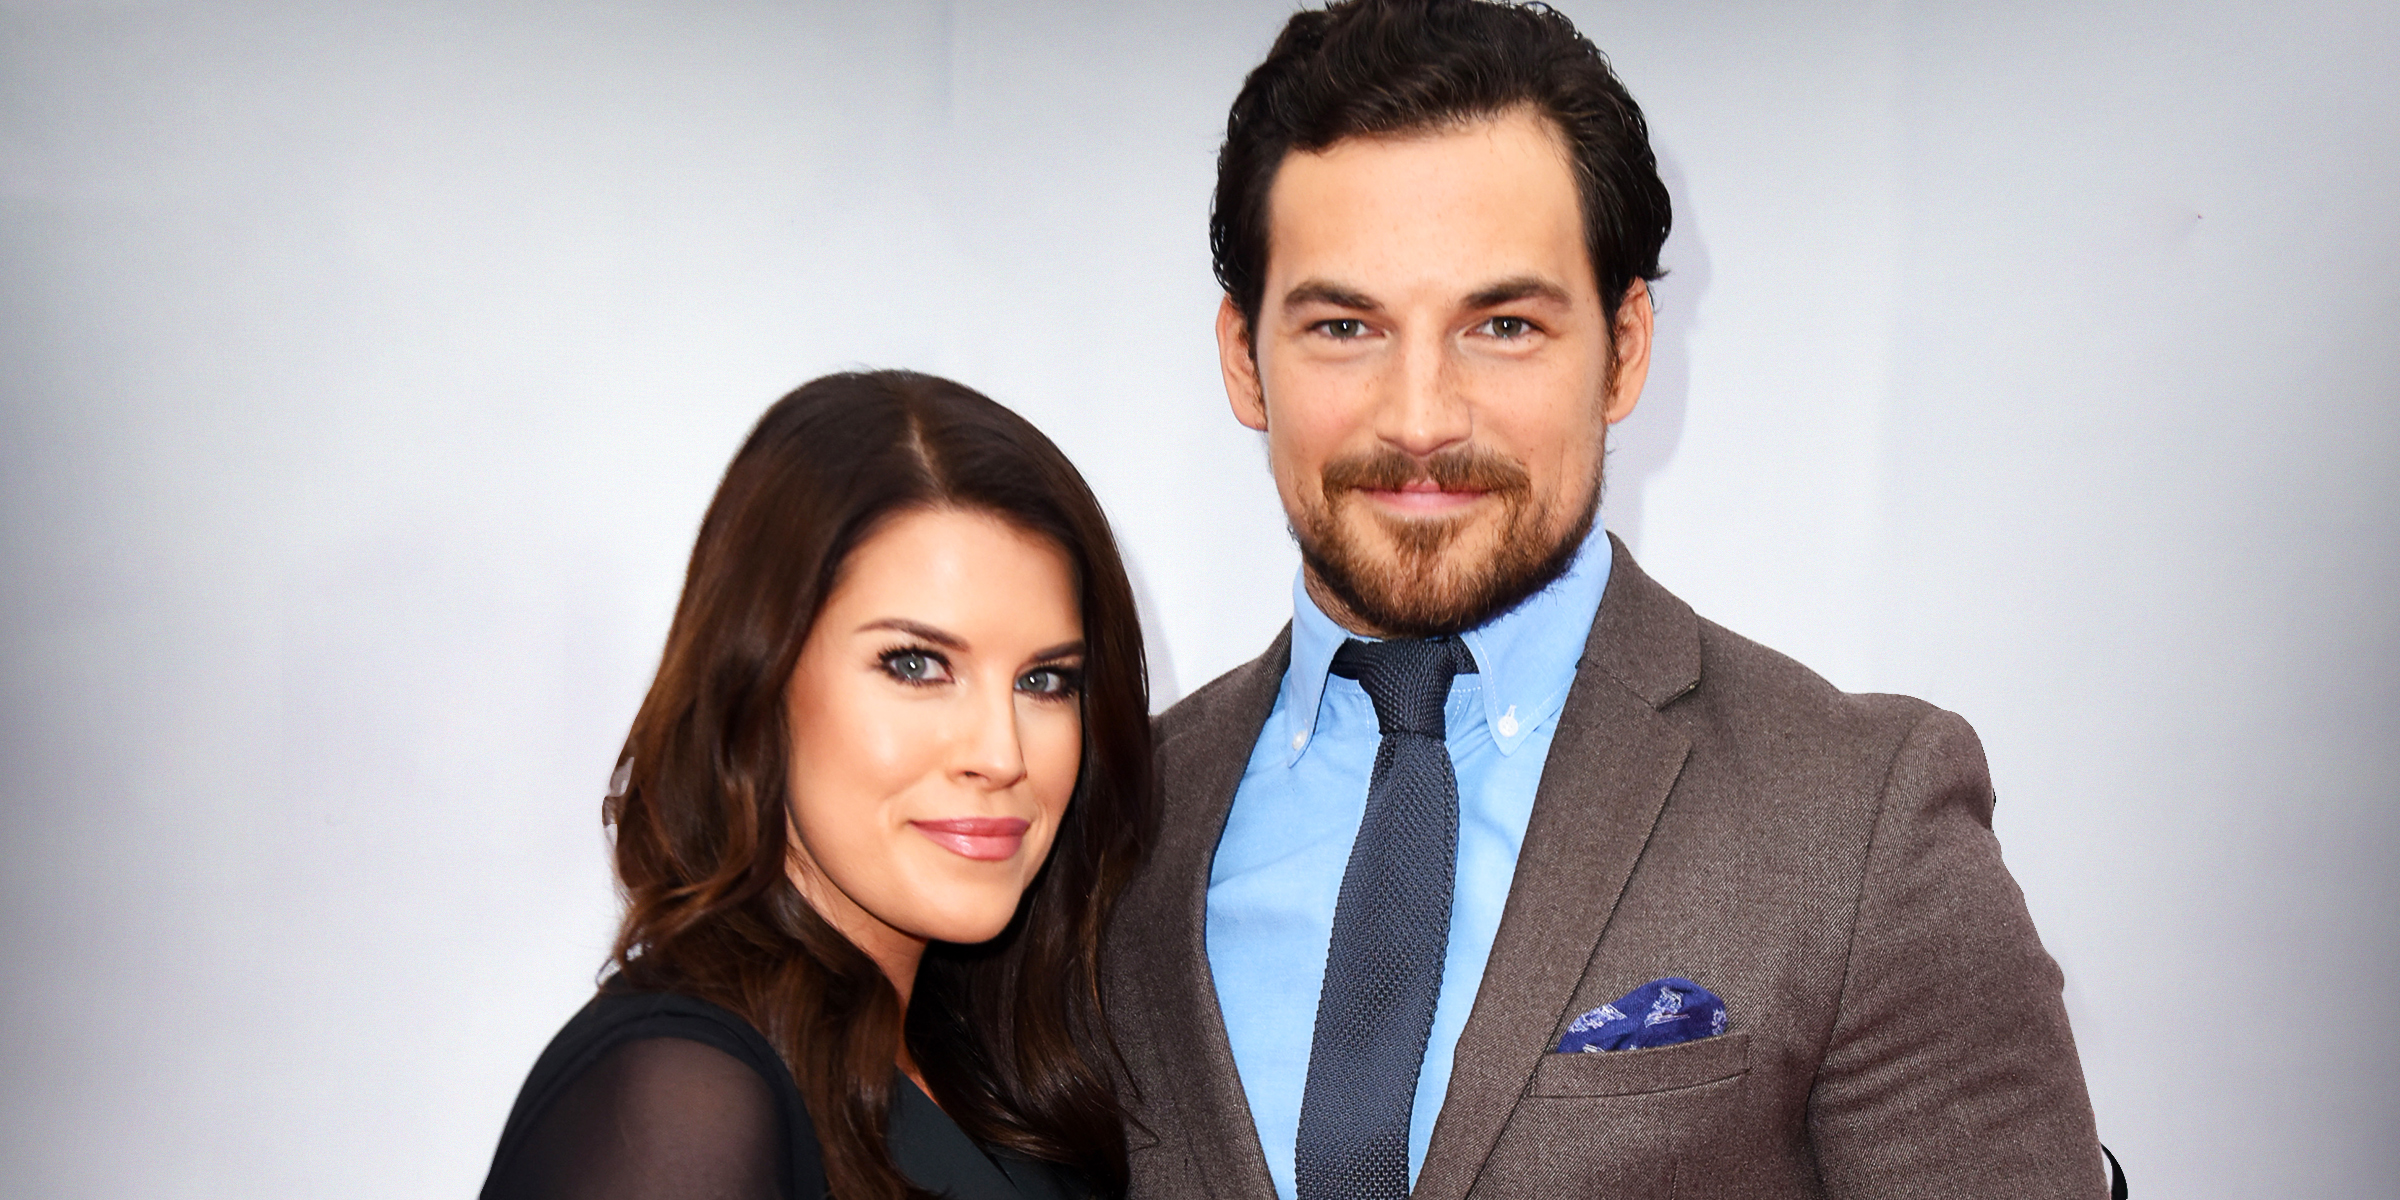 Nichole Gustafson and Giacomo Gianniotti | Source: Getty Images